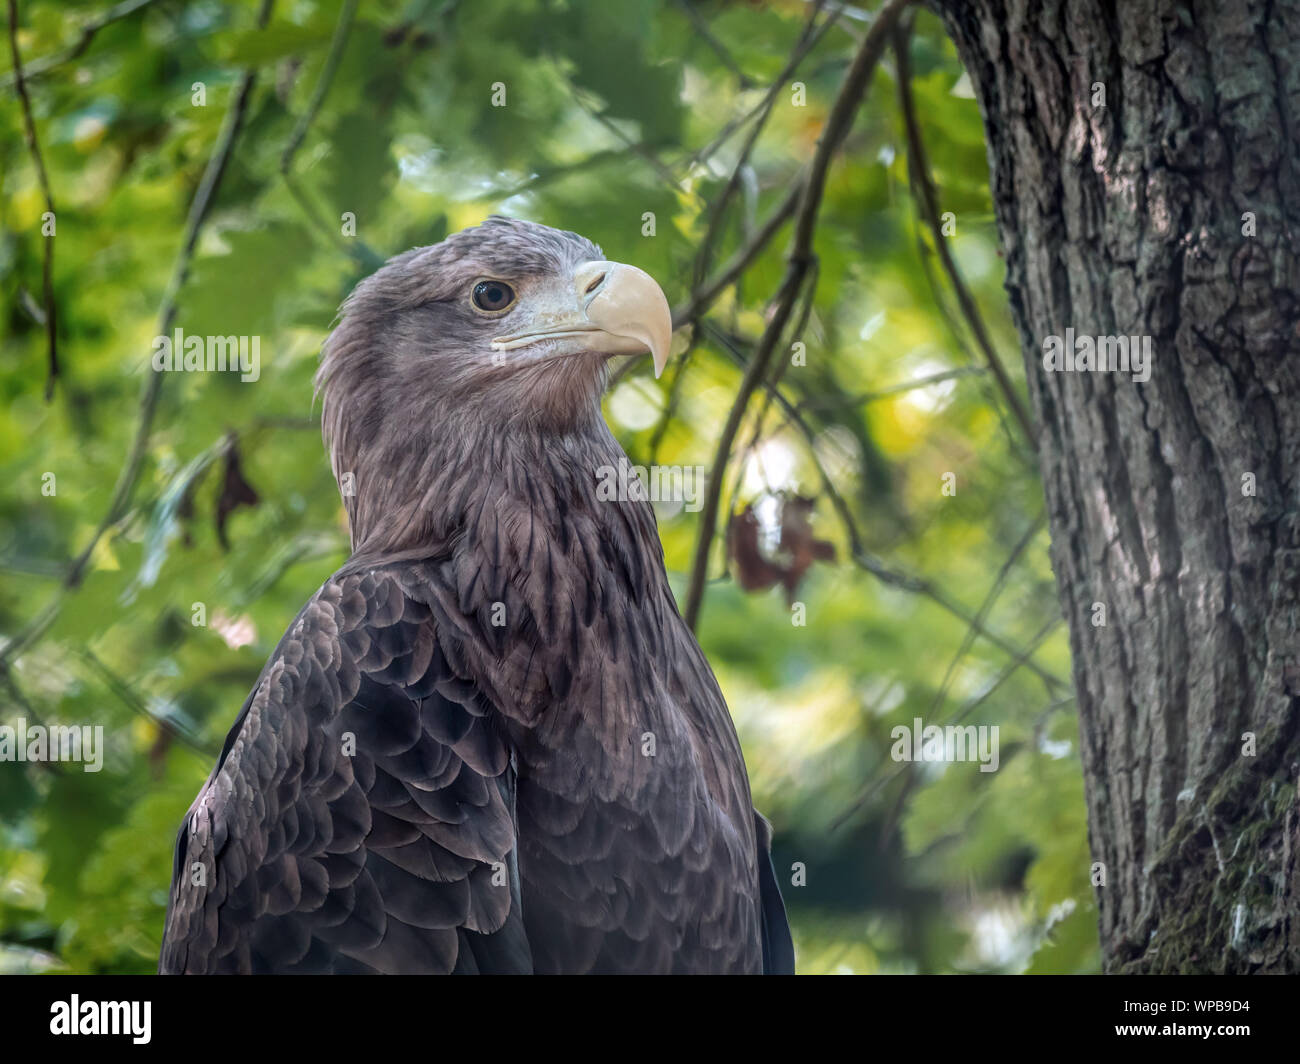 White-tailed sea eagle perched on a tree tranch in the aviary located in the Wolin National Park, Poland Stock Photo